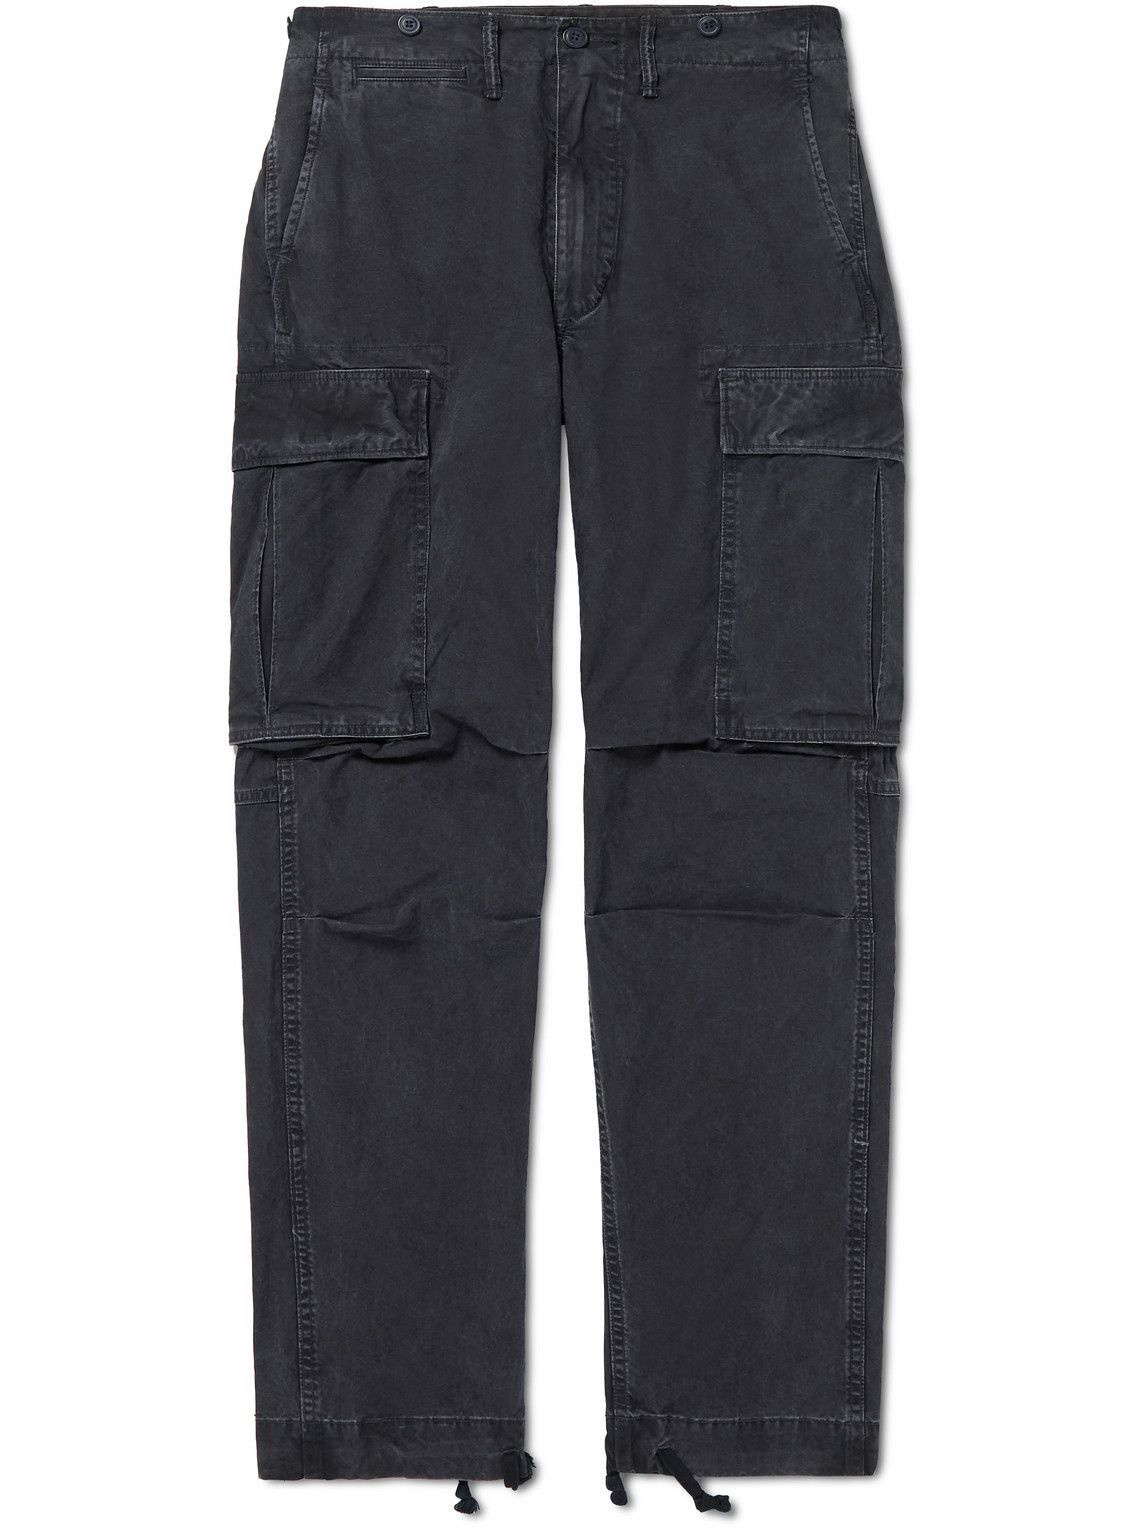 RRL - Tapered Cotton Cargo Trousers - Black RRL